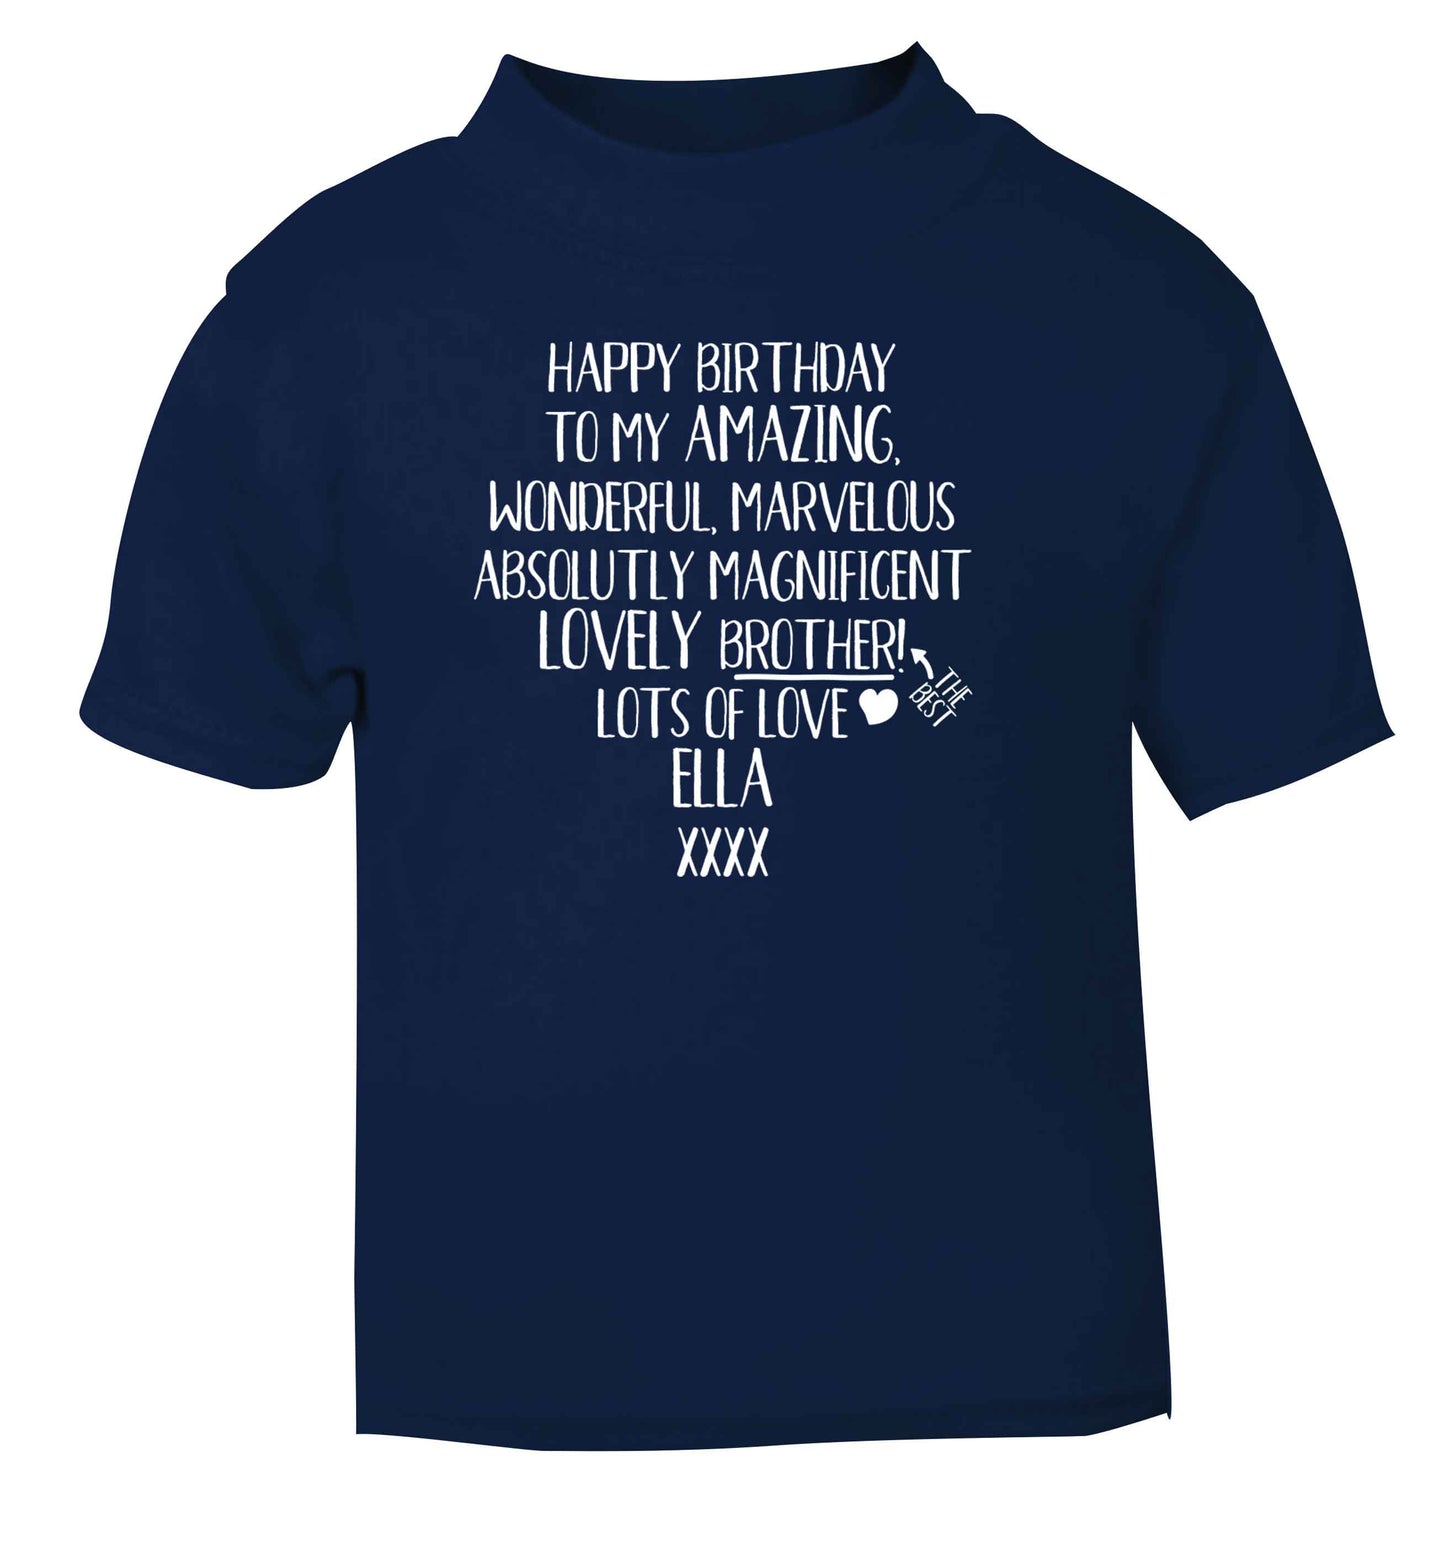 Personalised happy birthday to my amazing, wonderful, lovely brother navy Baby Toddler Tshirt 2 Years